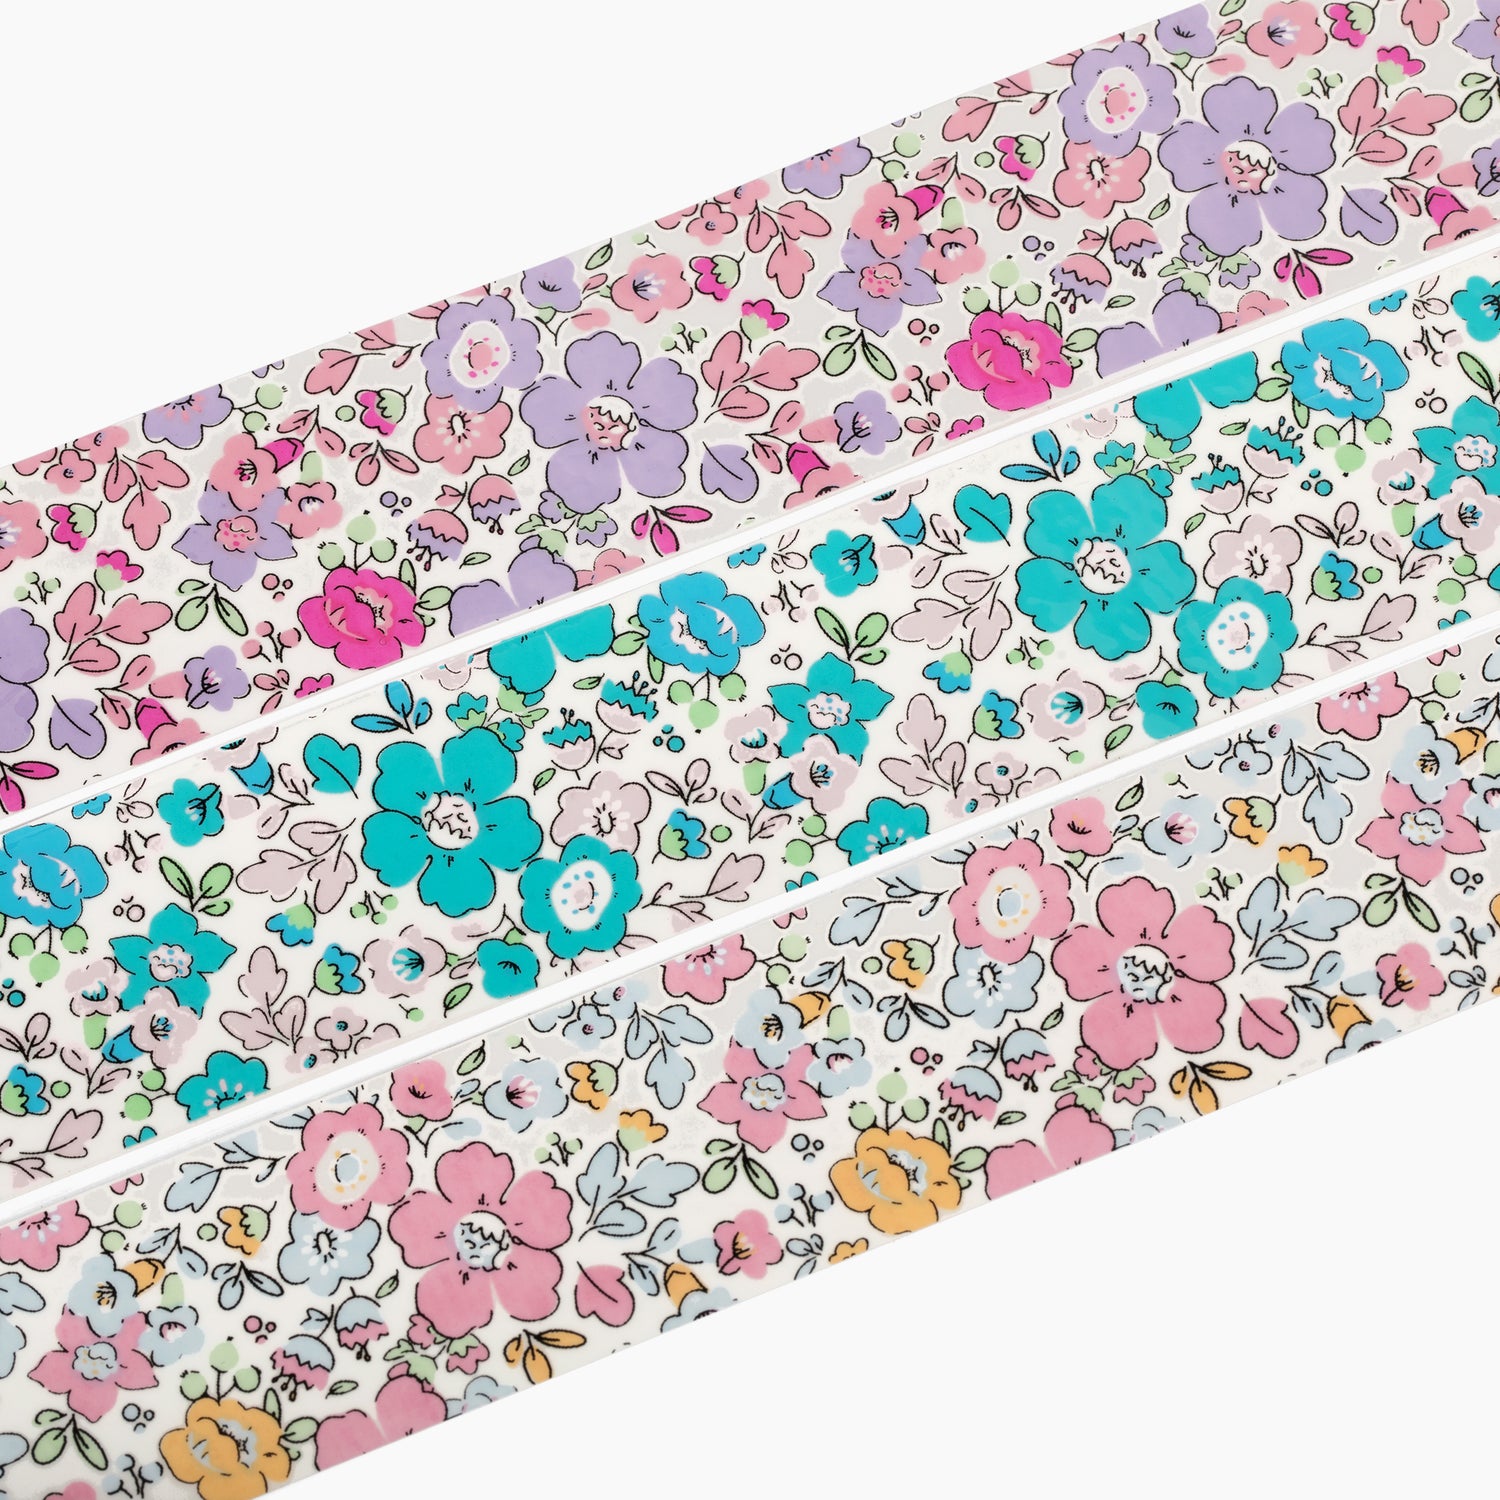 Intricate design of Strawberries and Cream™ Overgrips - Pink, Purple and Turquoise